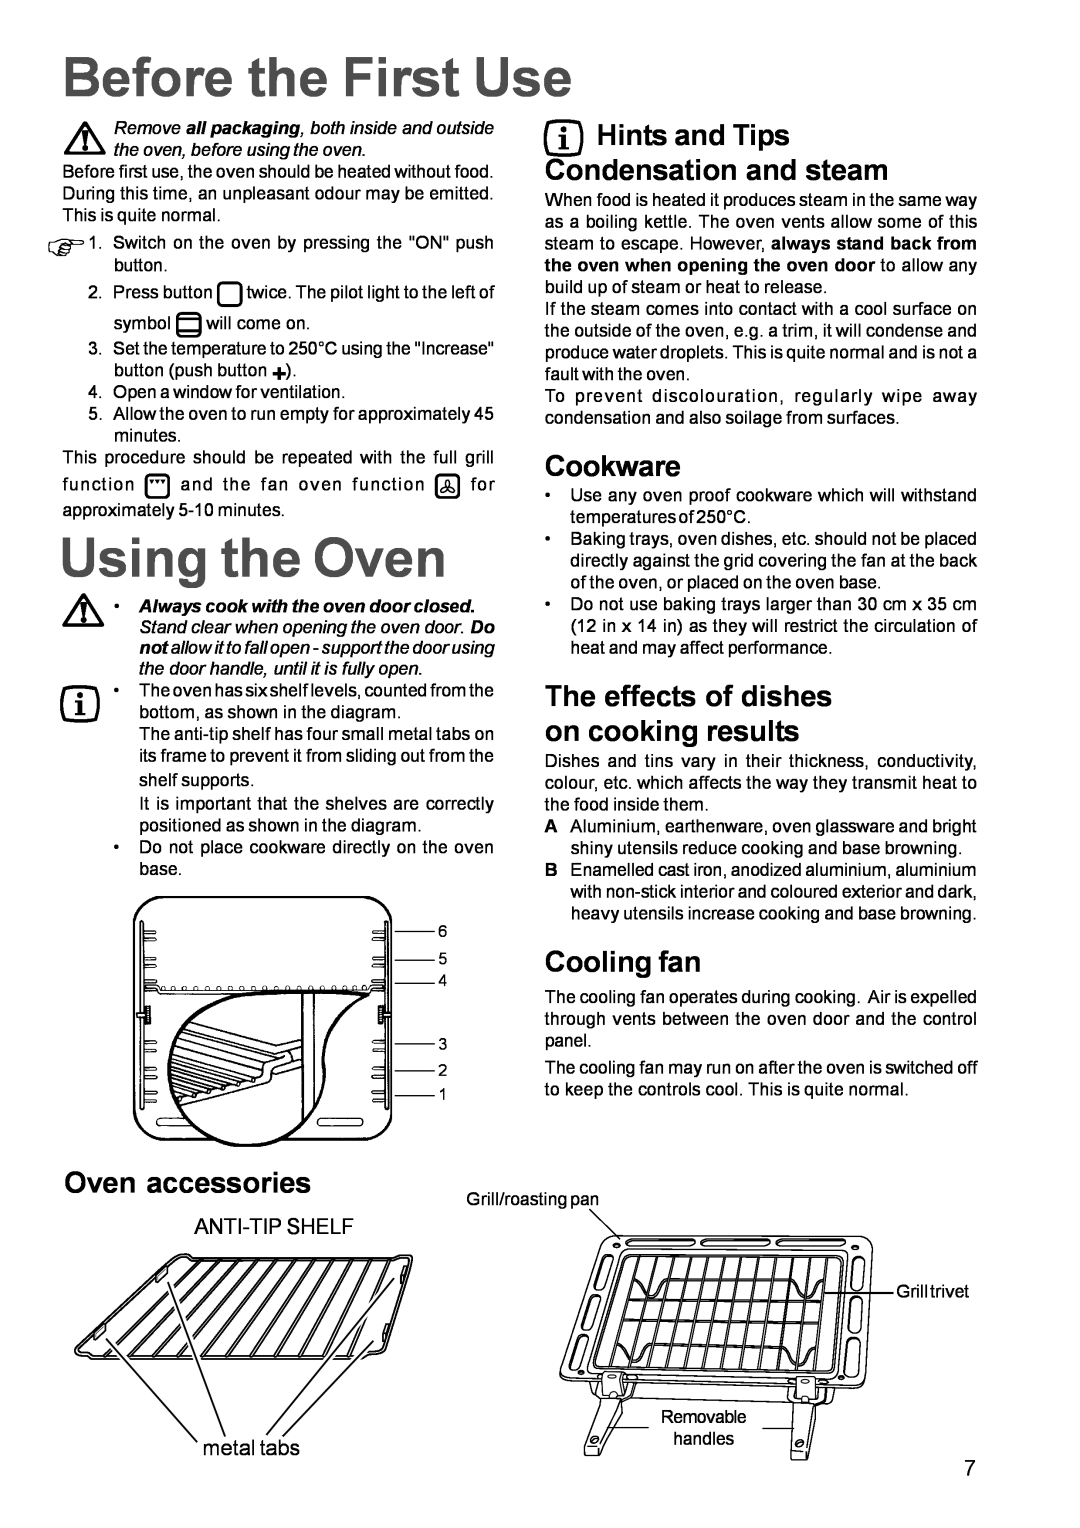 Zanussi ZBM 972 manual Before the First Use, Using the Oven, Hints and Tips Condensation and steam, Cookware, Cooling fan 